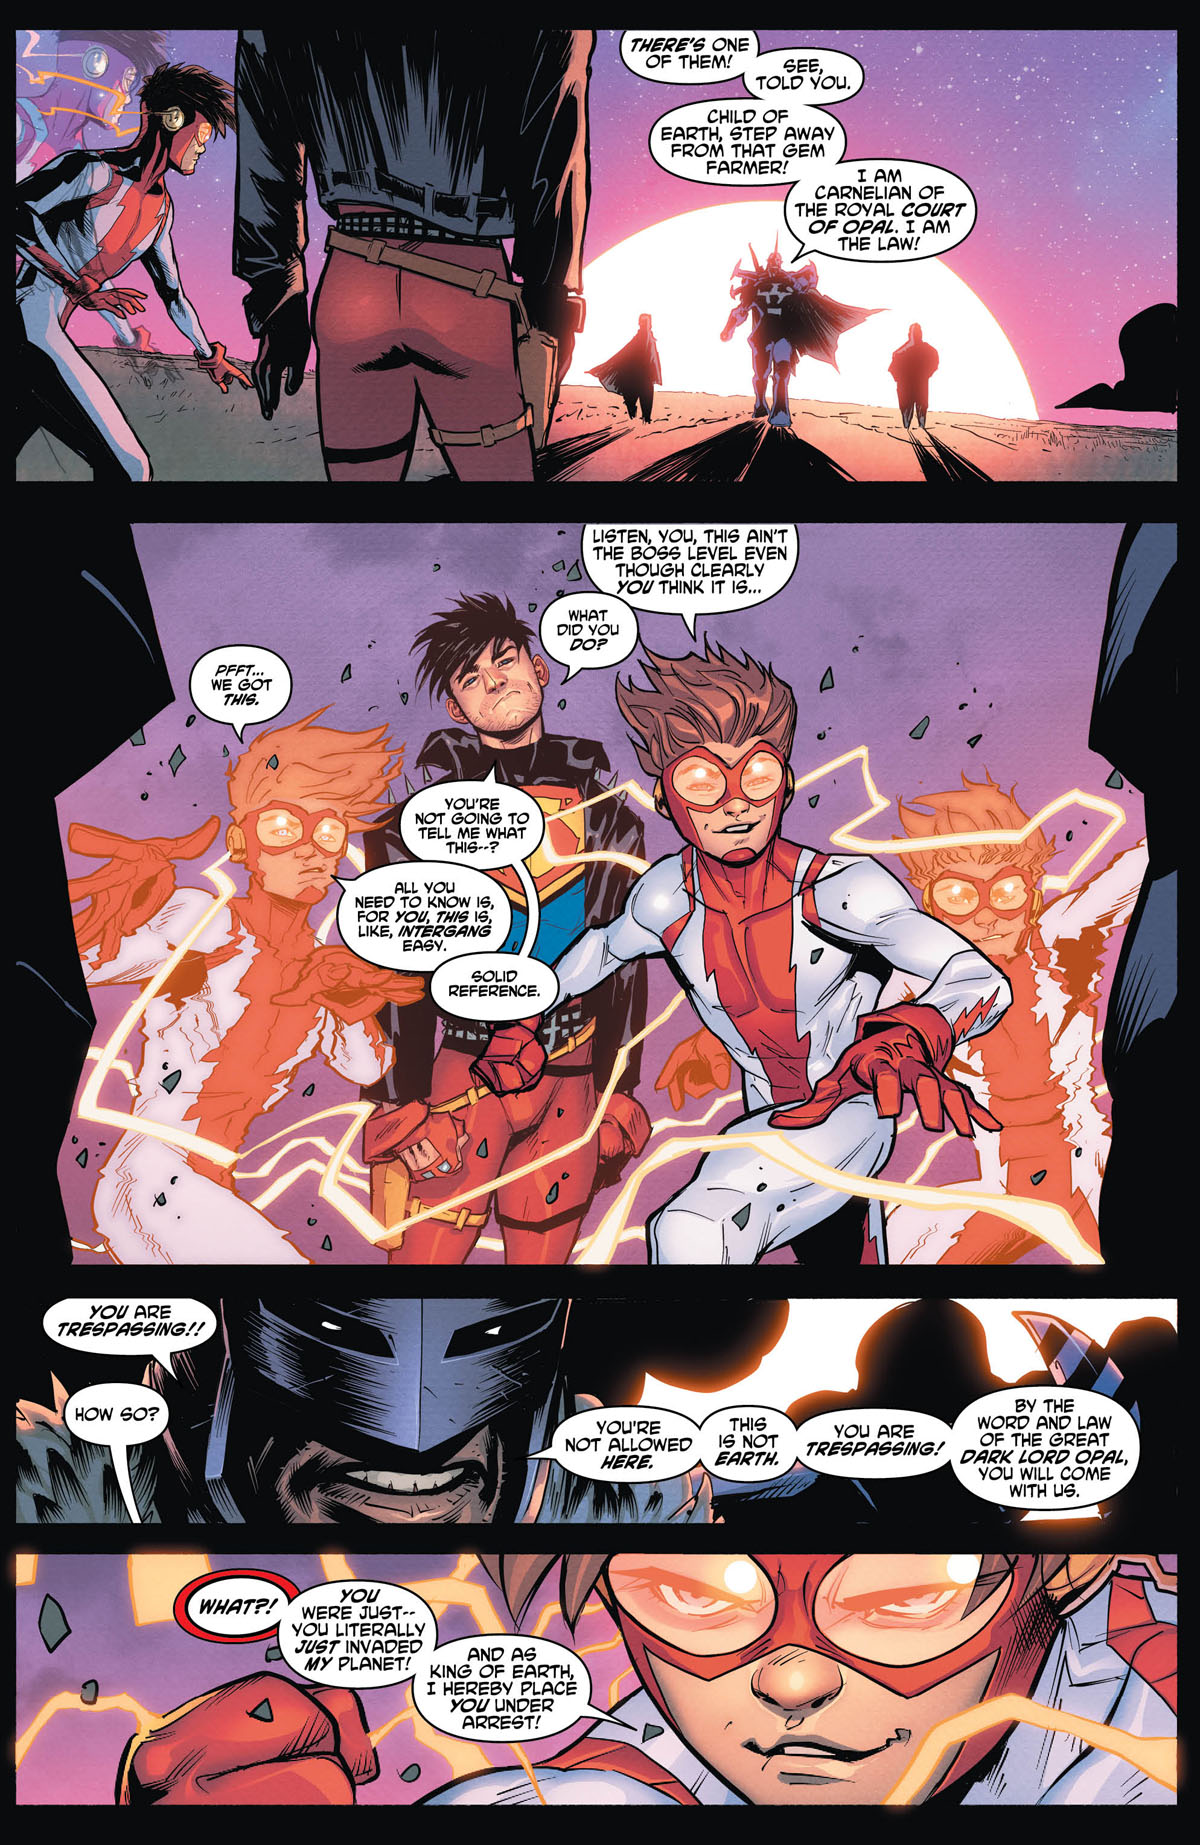 Young Justice #3 page 3